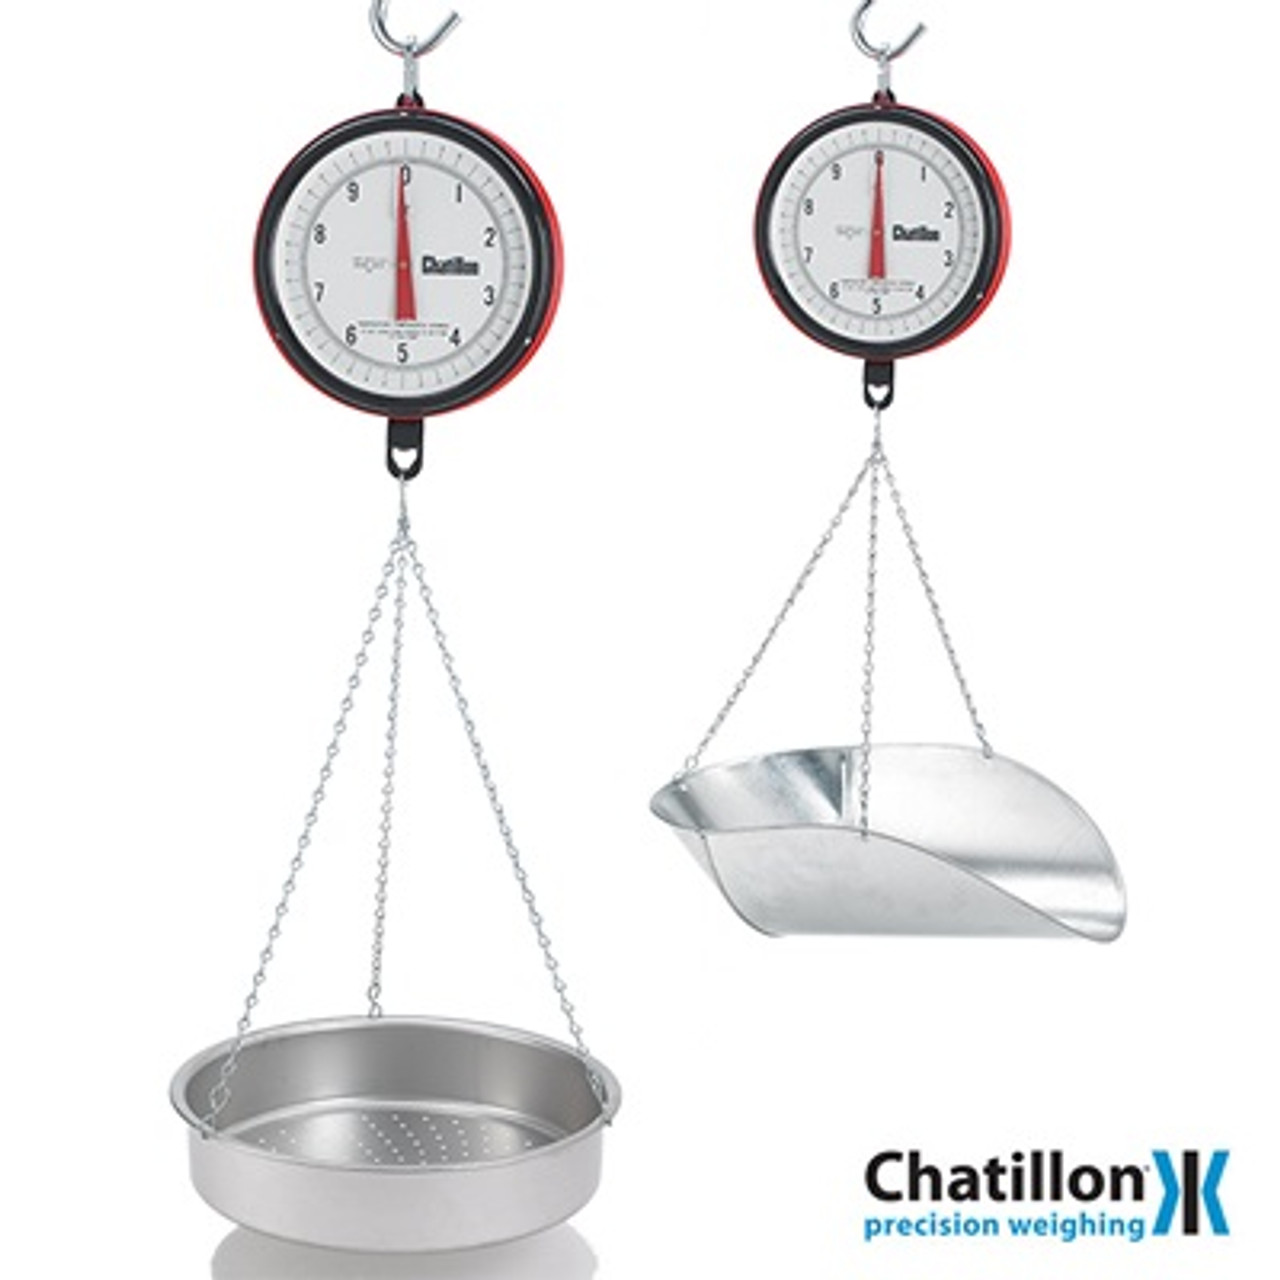 https://cdn11.bigcommerce.com/s-3of87tnd2m/images/stencil/1280x1280/products/7797/22319/Chatillon_Century_Scales-CAS__13659.1667454348.jpg?c=1